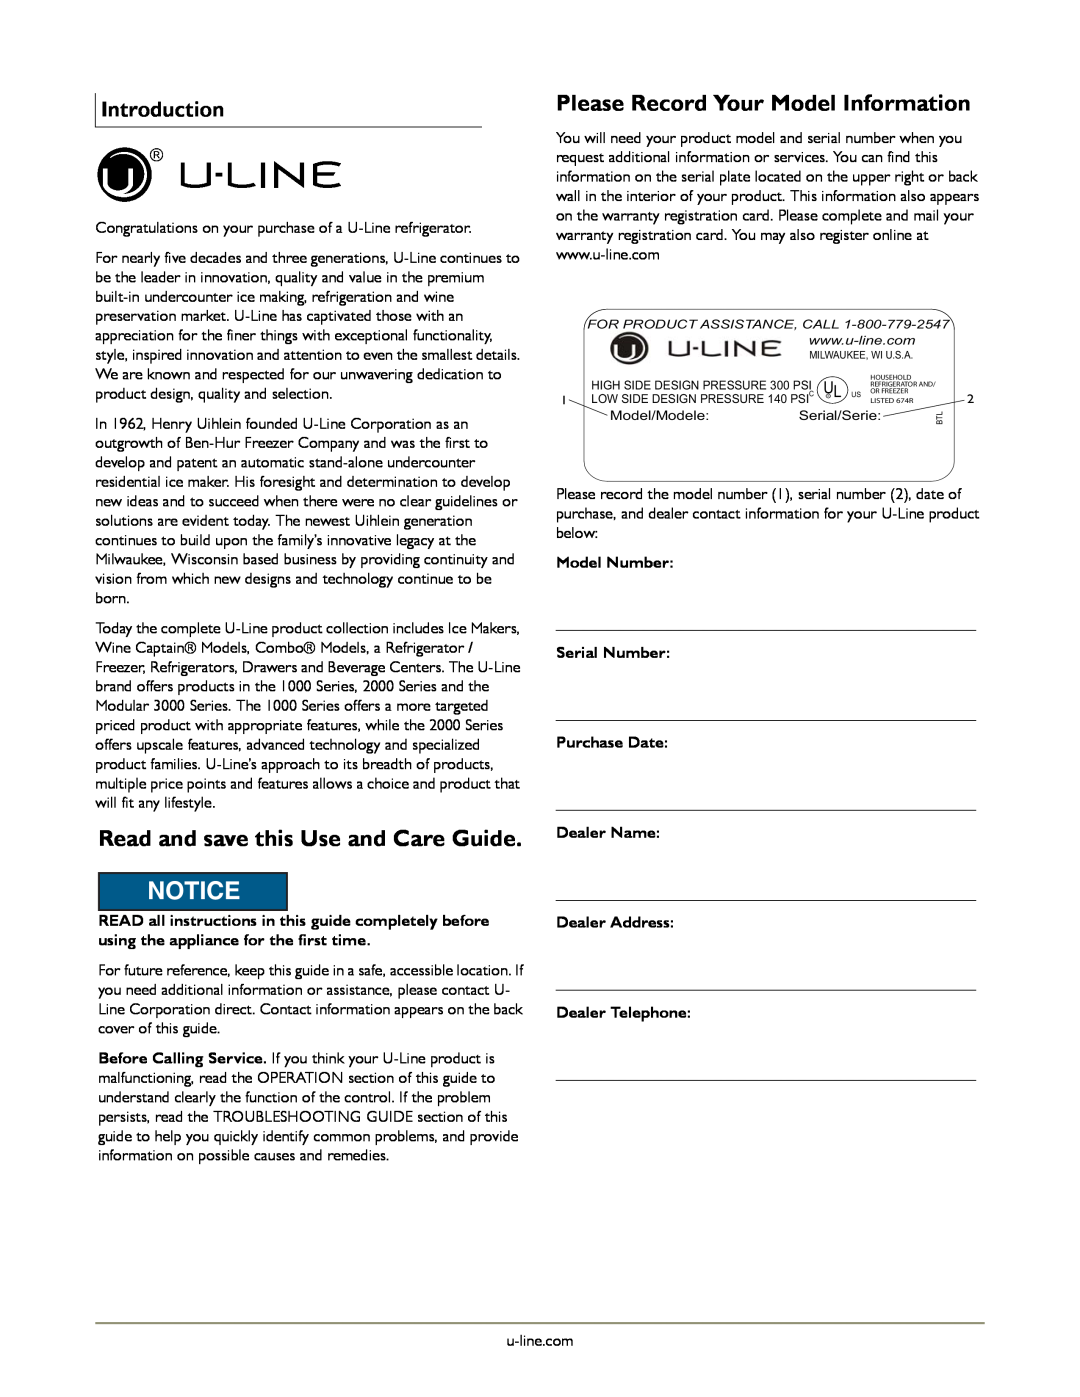 U-Line U-CLRCO2175S-41 manual Read and save this Use and Care Guide, Please Record Your Model Information, Introduction 